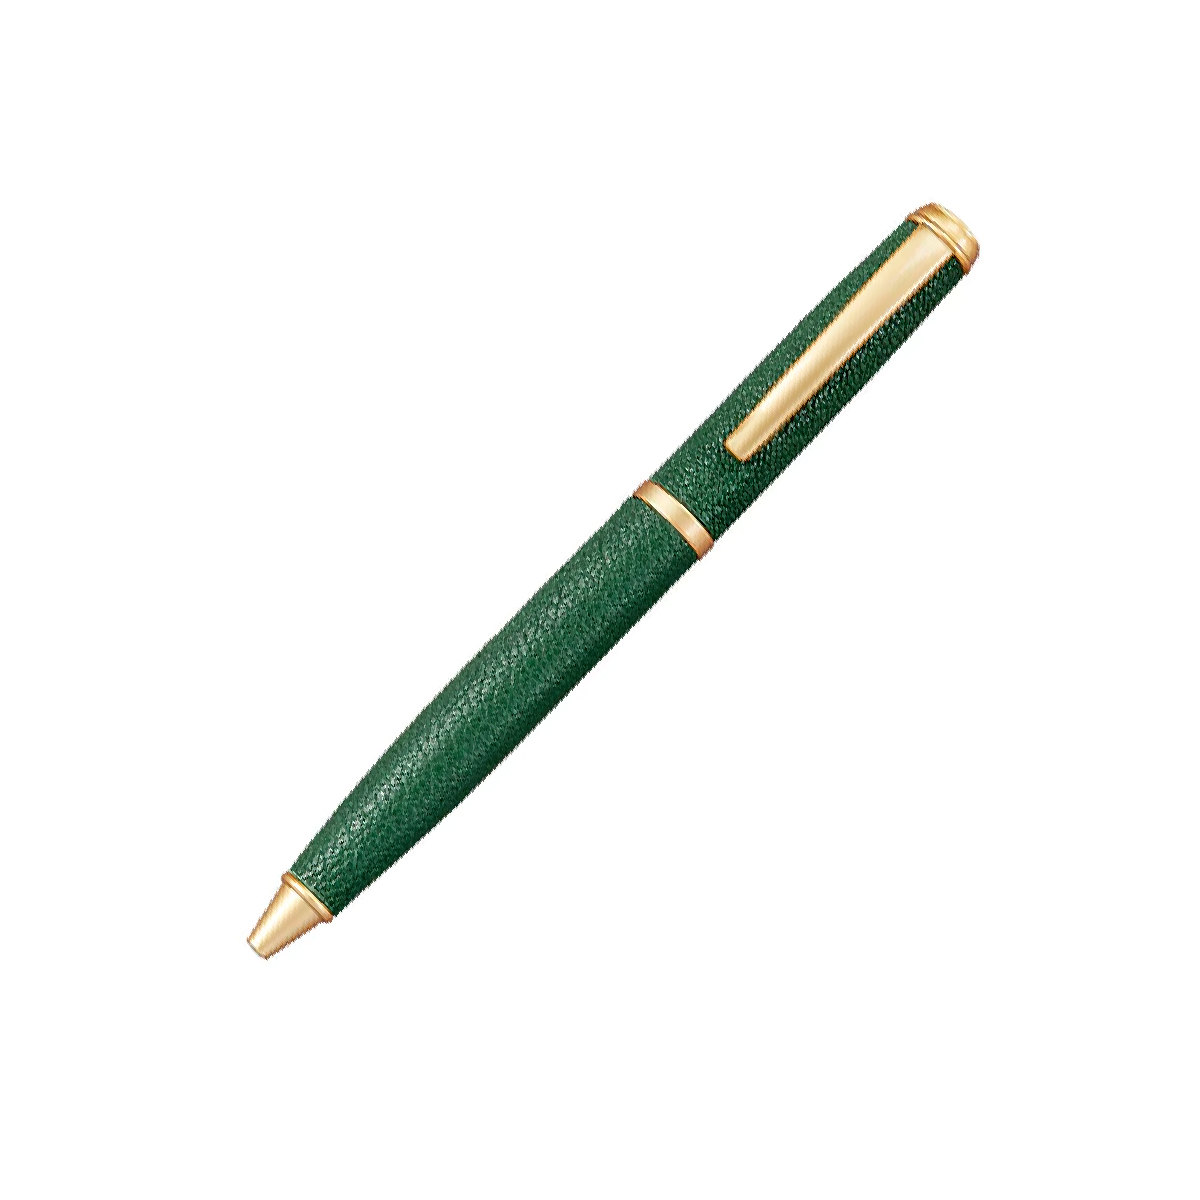 Graphic Image - Green Goatskin Leather Wrapped Pen